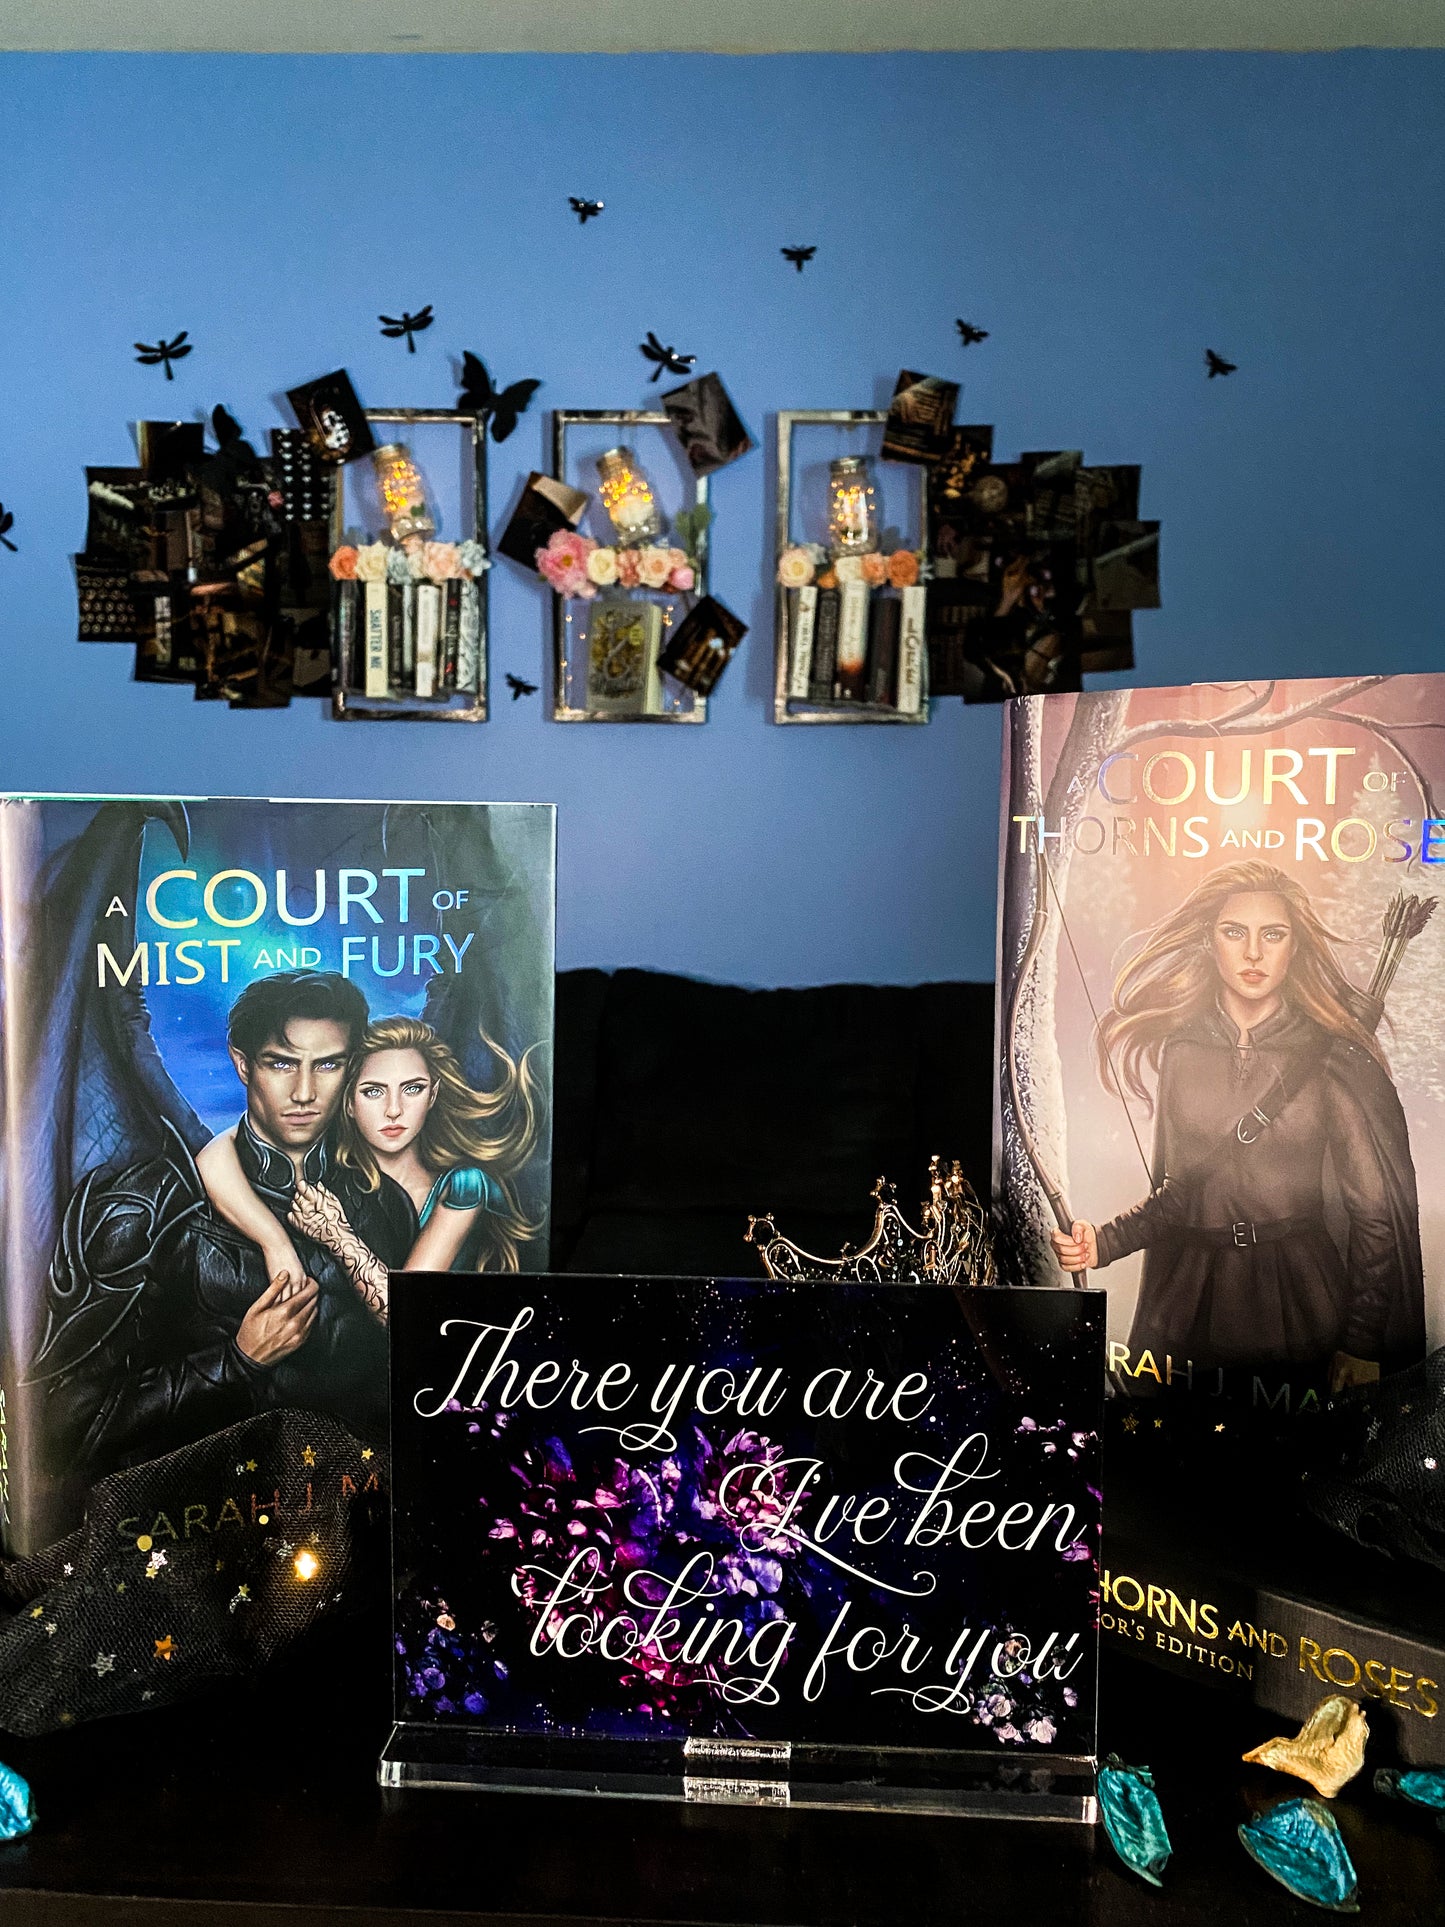 "There you are. I've been looking for you." - A Court of Thorns and Roses Series - Freestanding Bookshelf / Desktop Acrylic Accessory - Officially licensed by Sarah J. Maas - D15